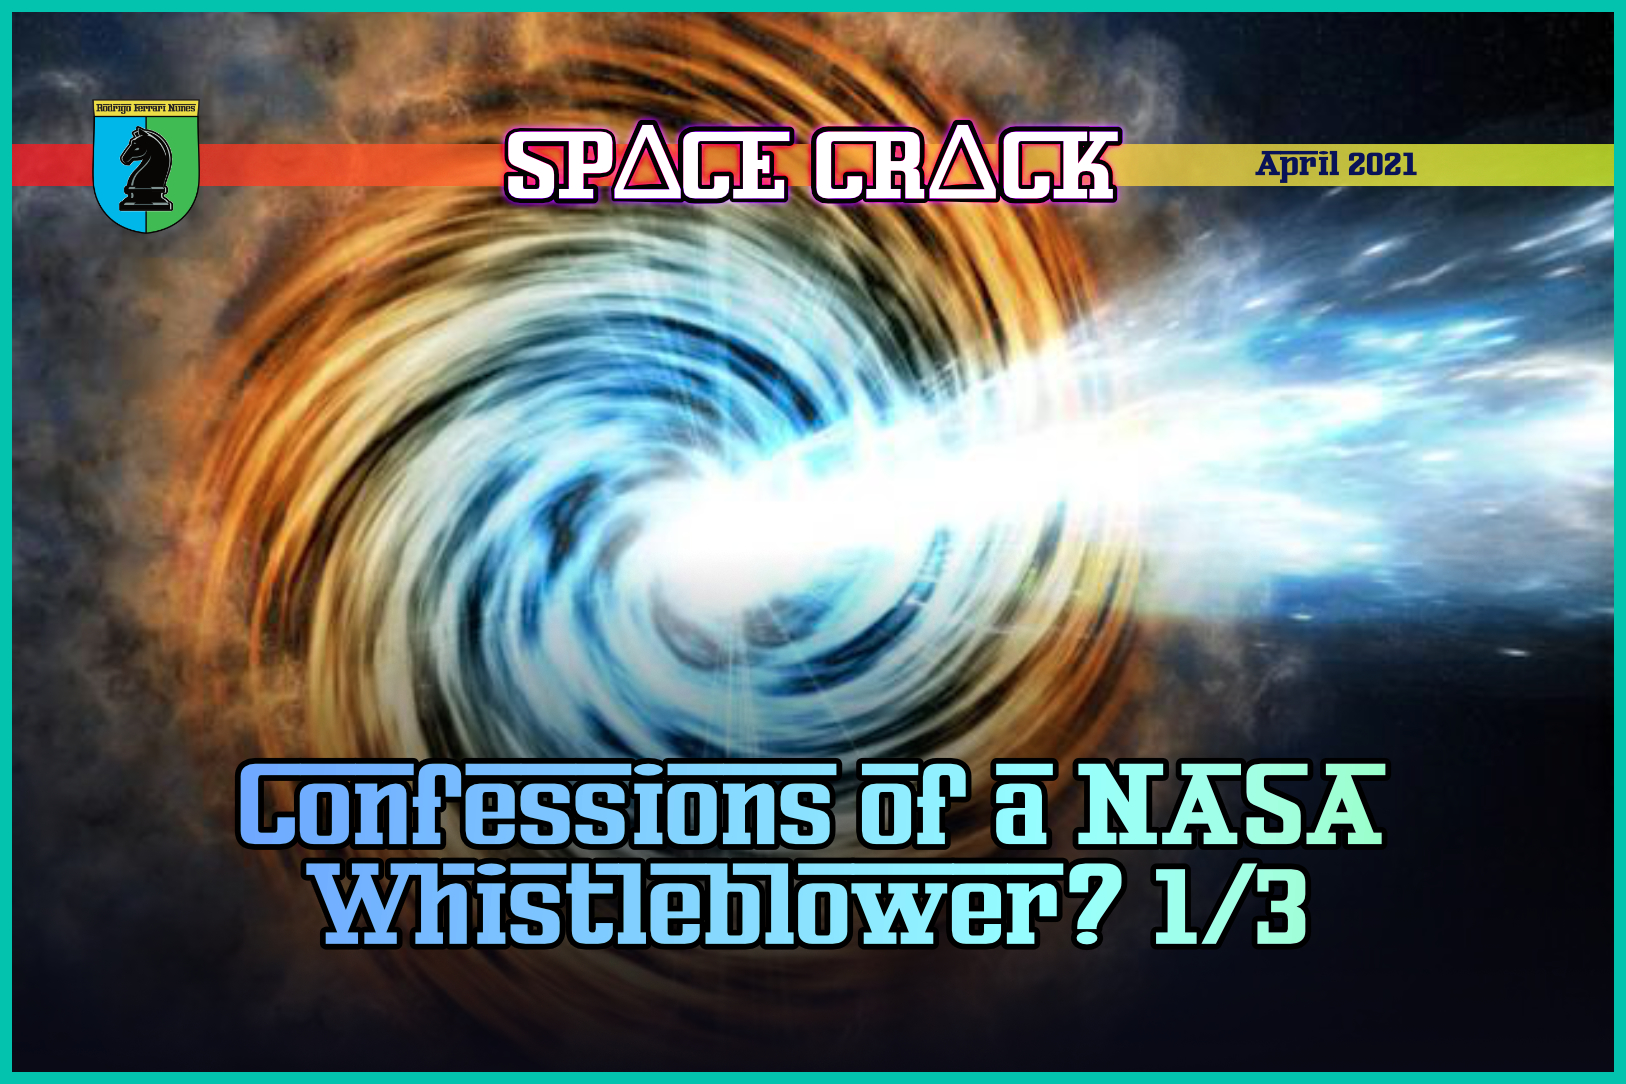 CONFESSIONS OF A NASA WHISTLEBLOWER? PART 1/3